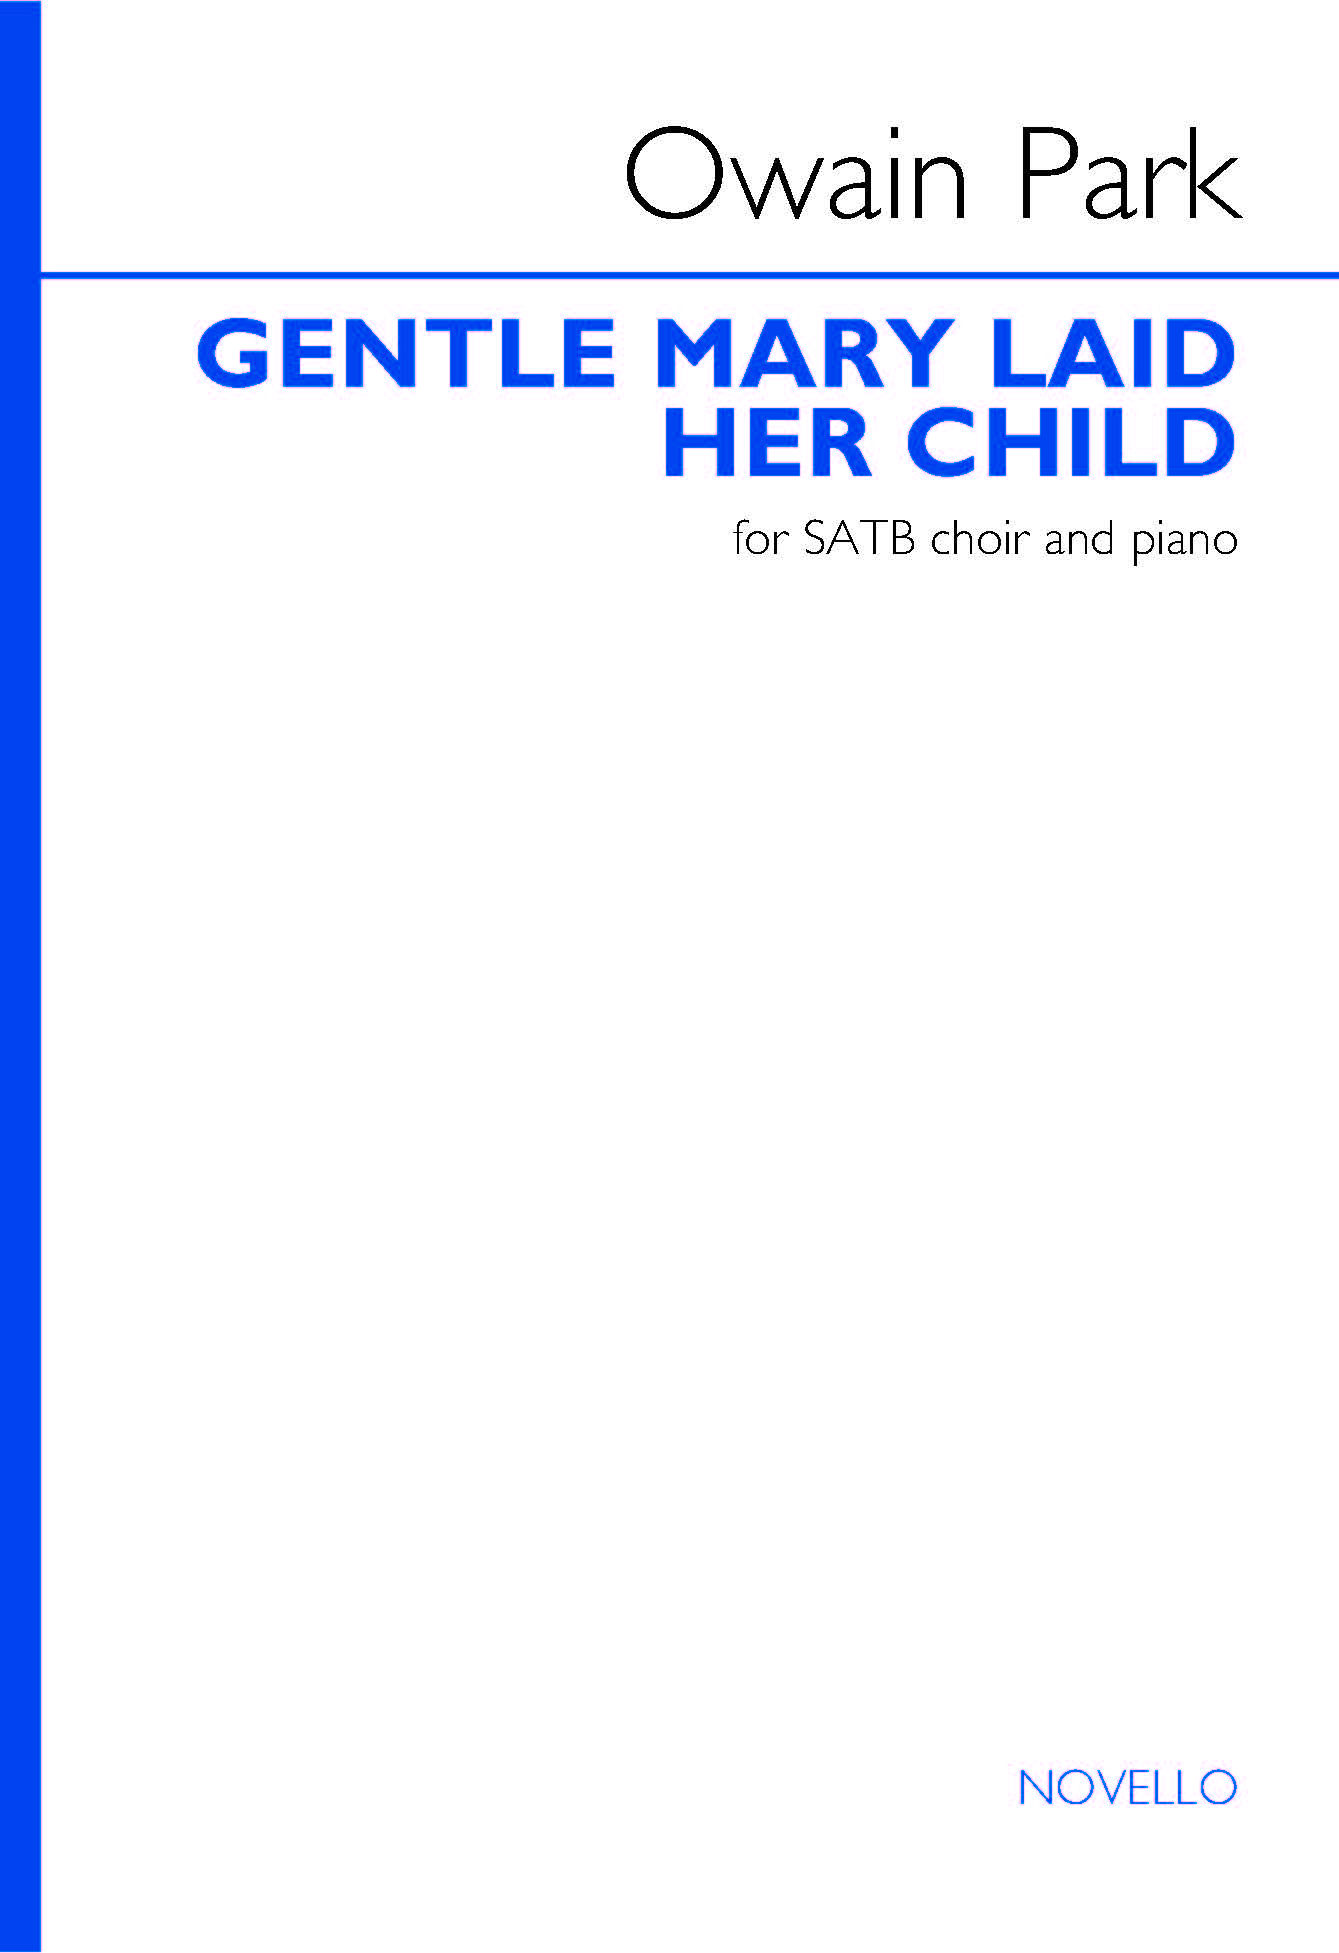 Owain Park: Gentle Mary Laid Her Child: SATB: Vocal Score